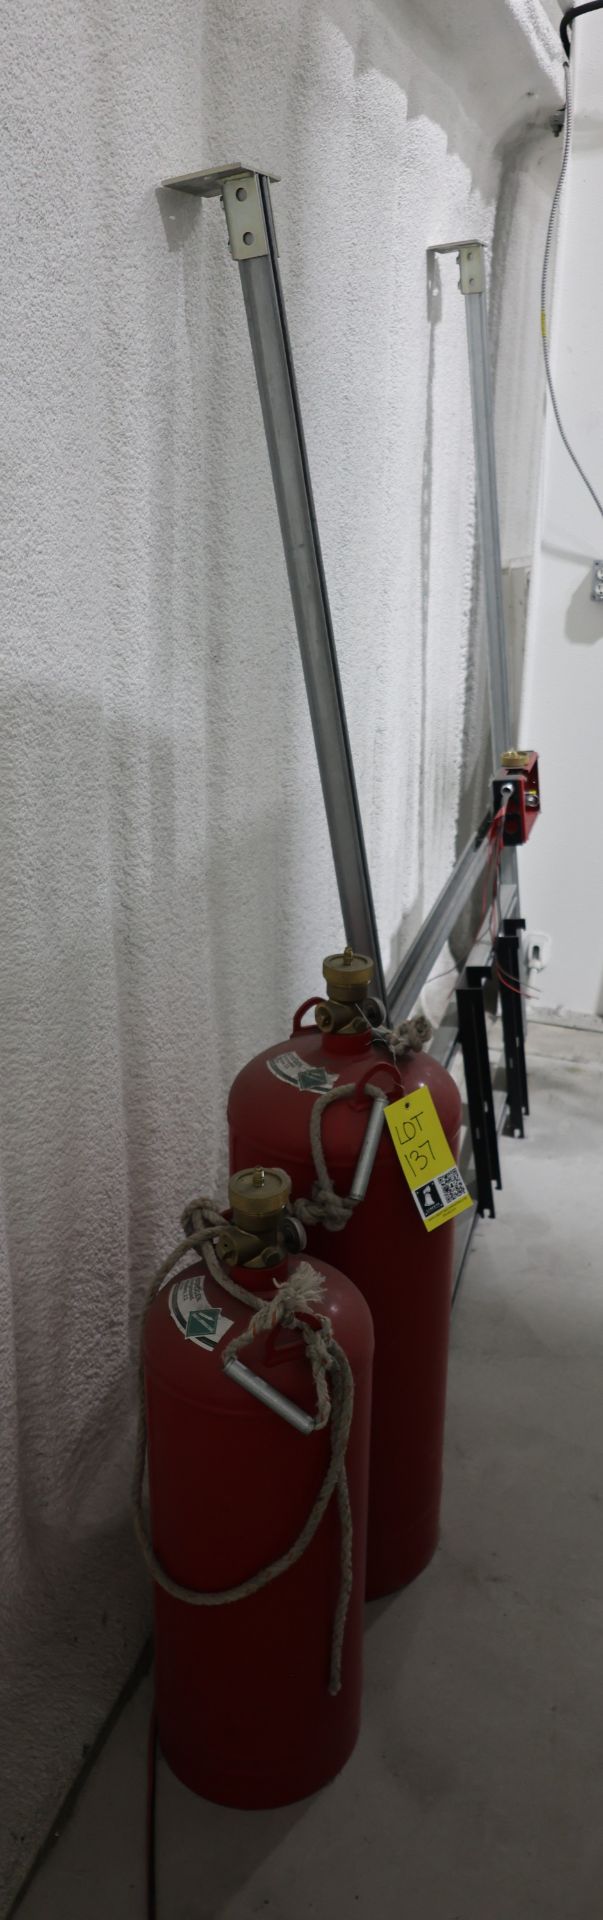 Fire Suppression System - Image 4 of 4